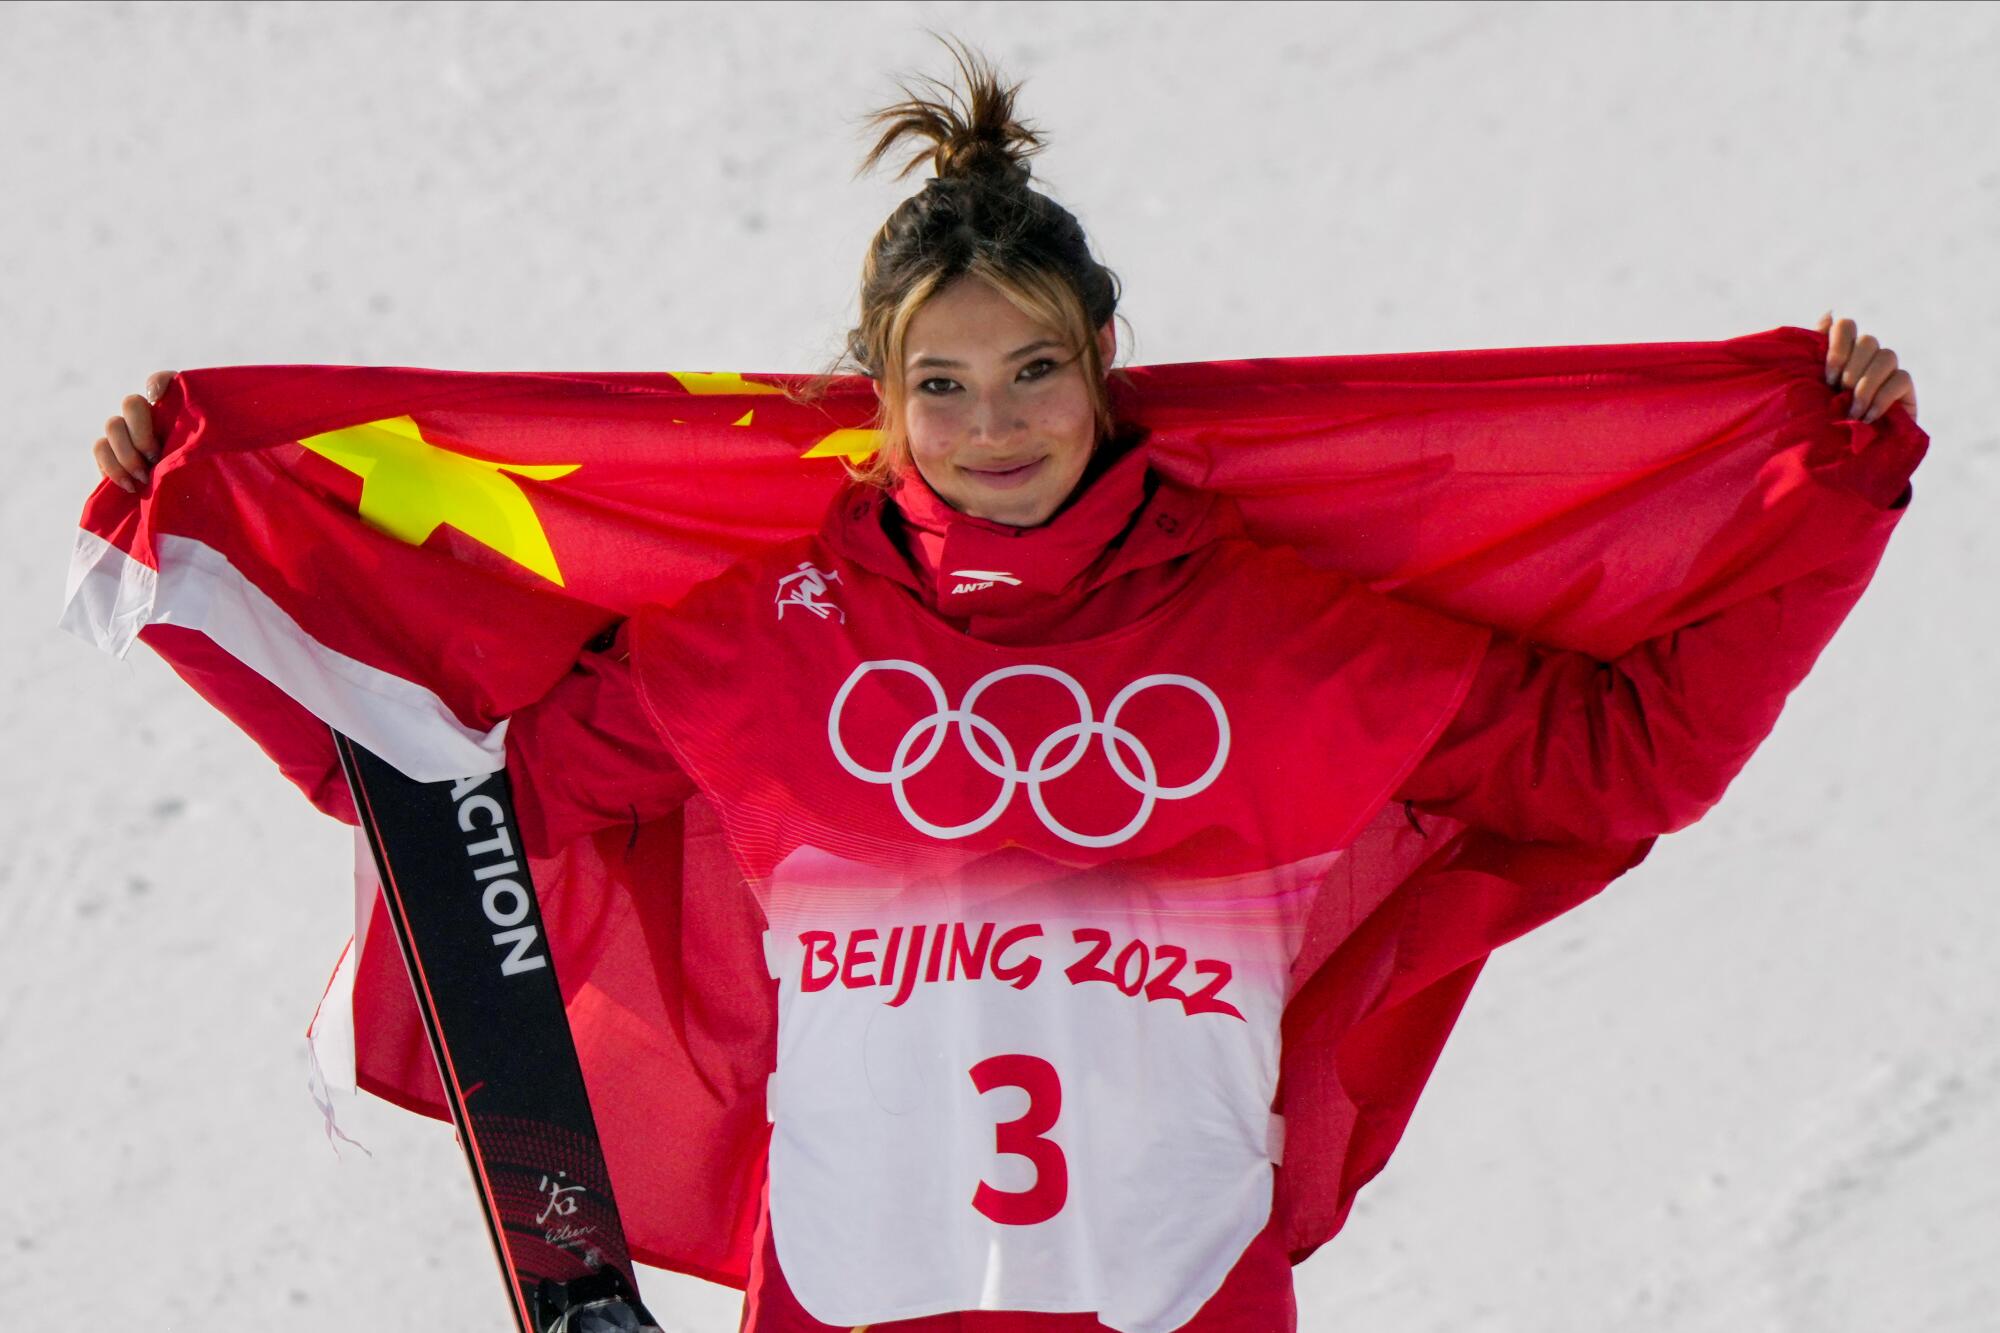 Former U.S. Ski Champ to Compete for China in Beijing 2022